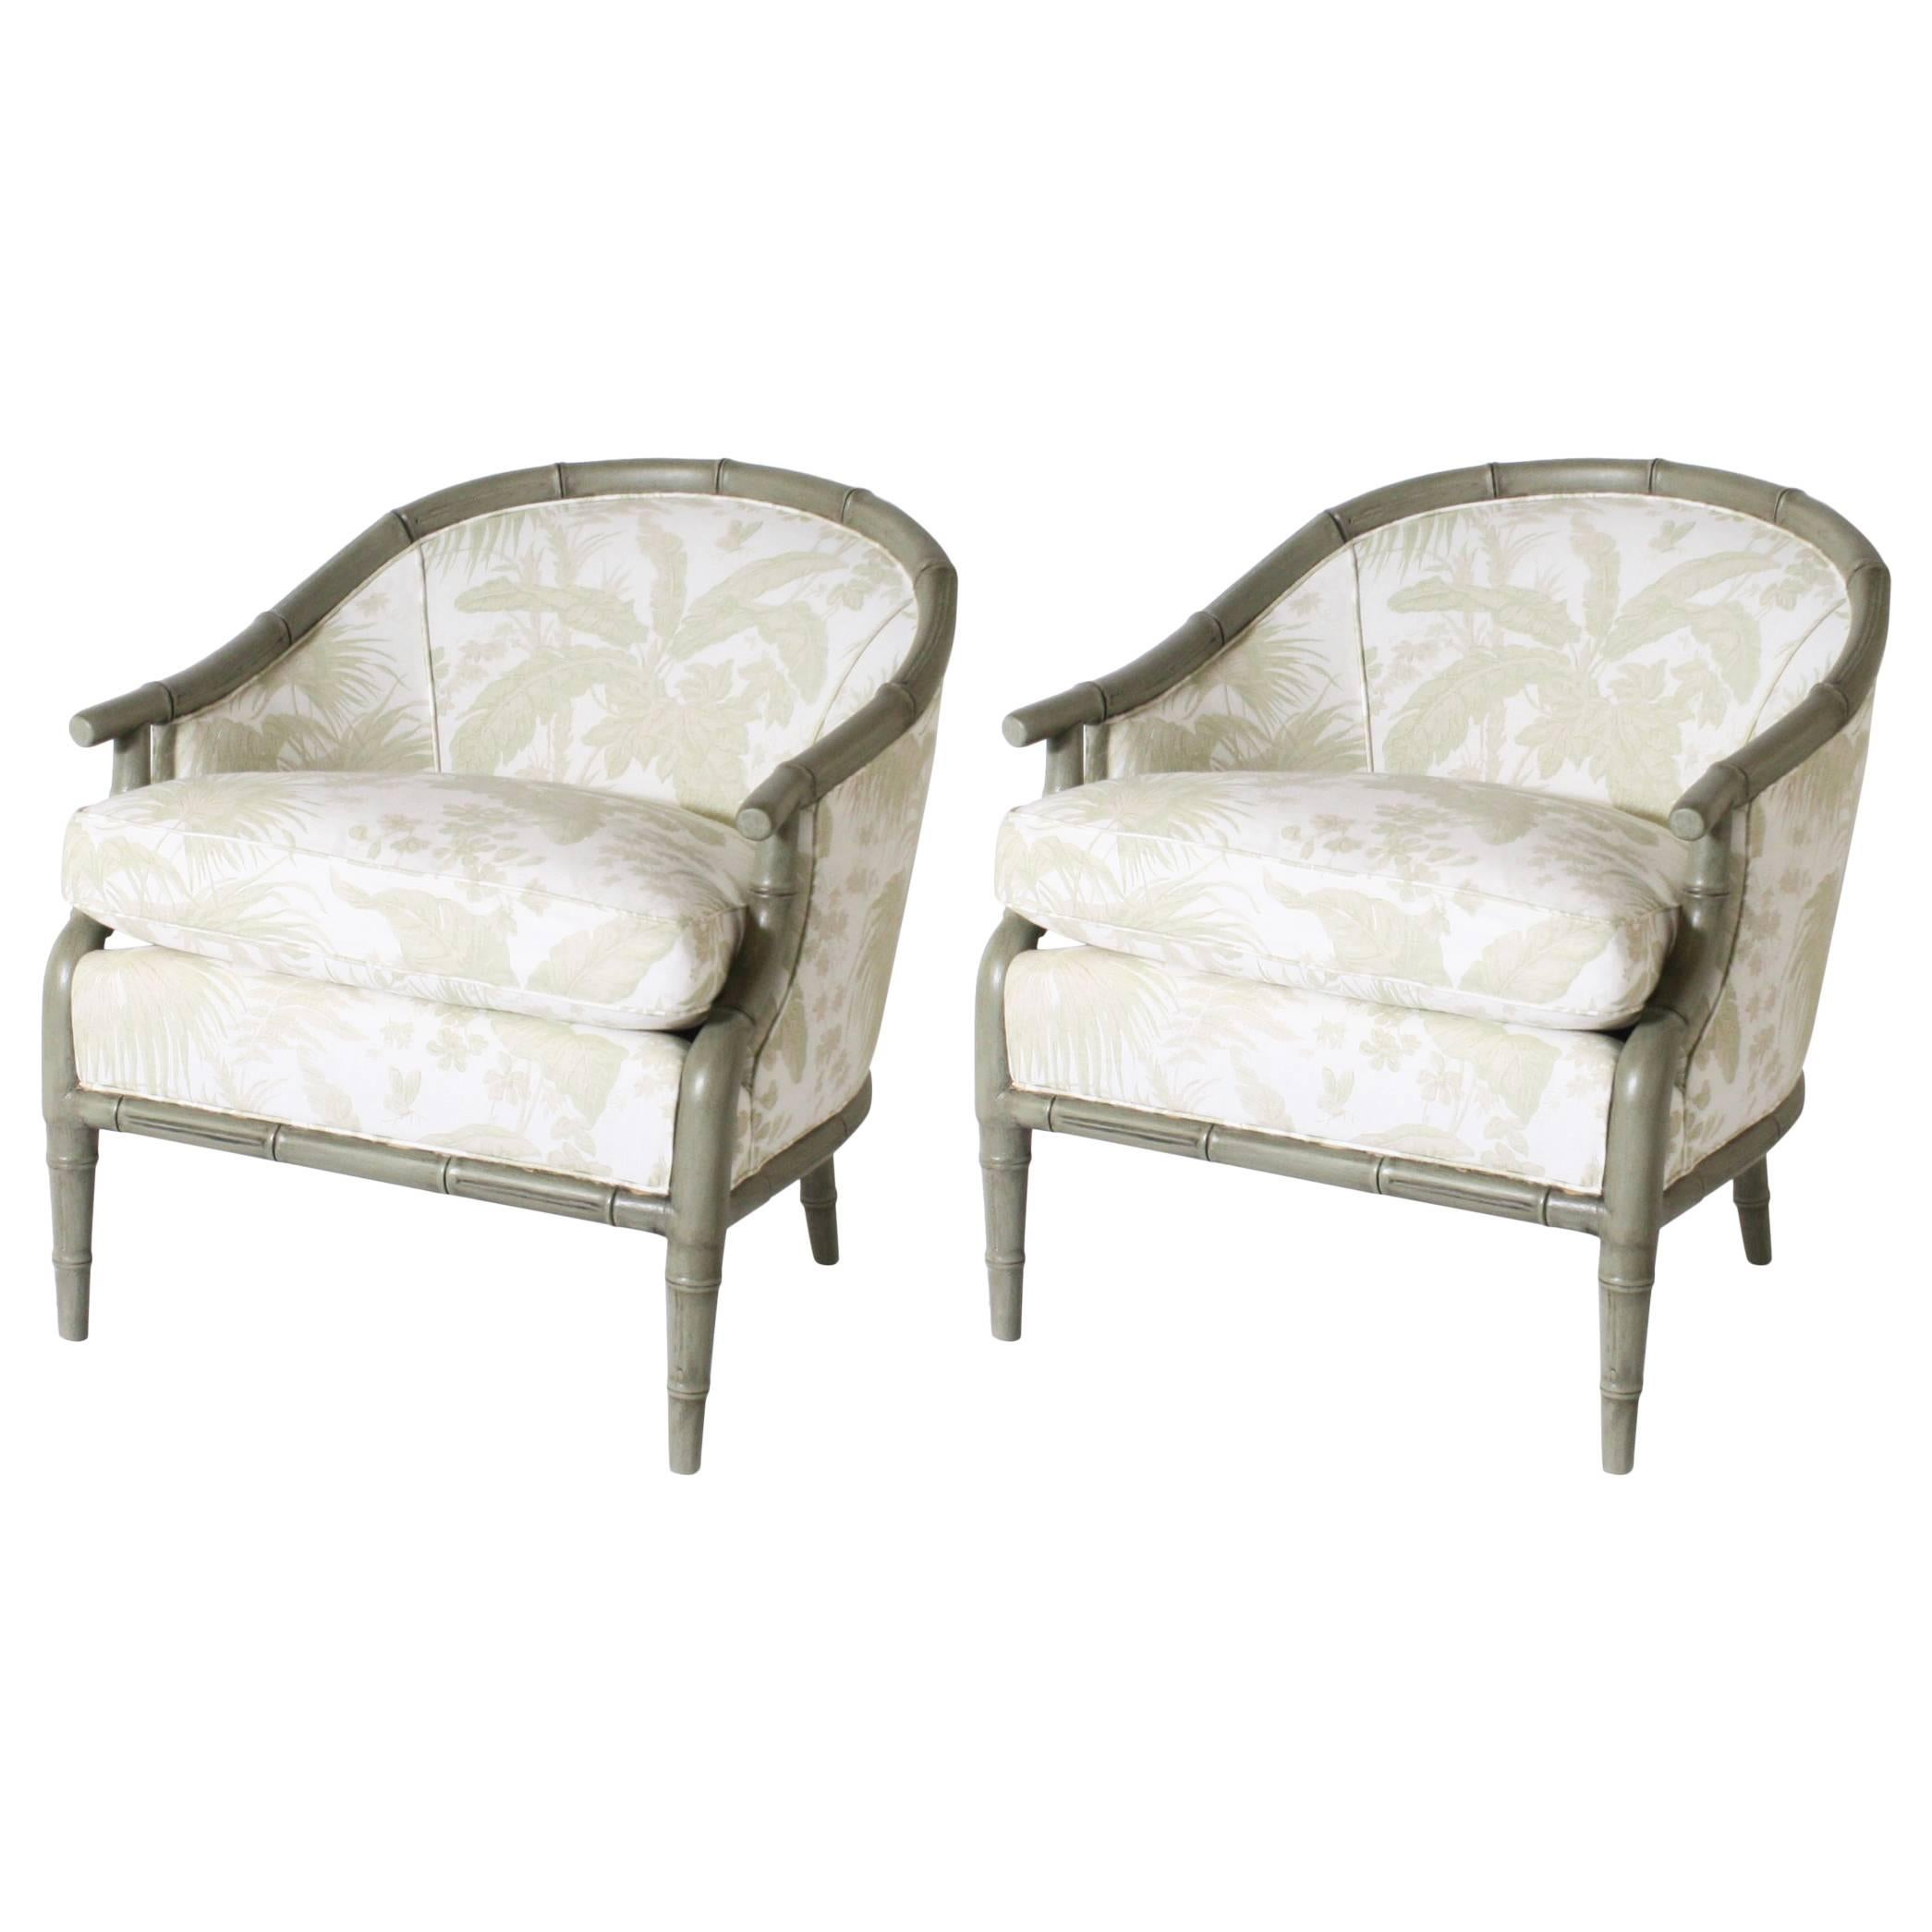 Pair of Faux Bamboo Chairs Upholstered in Jan Showers for Kravet Fabric